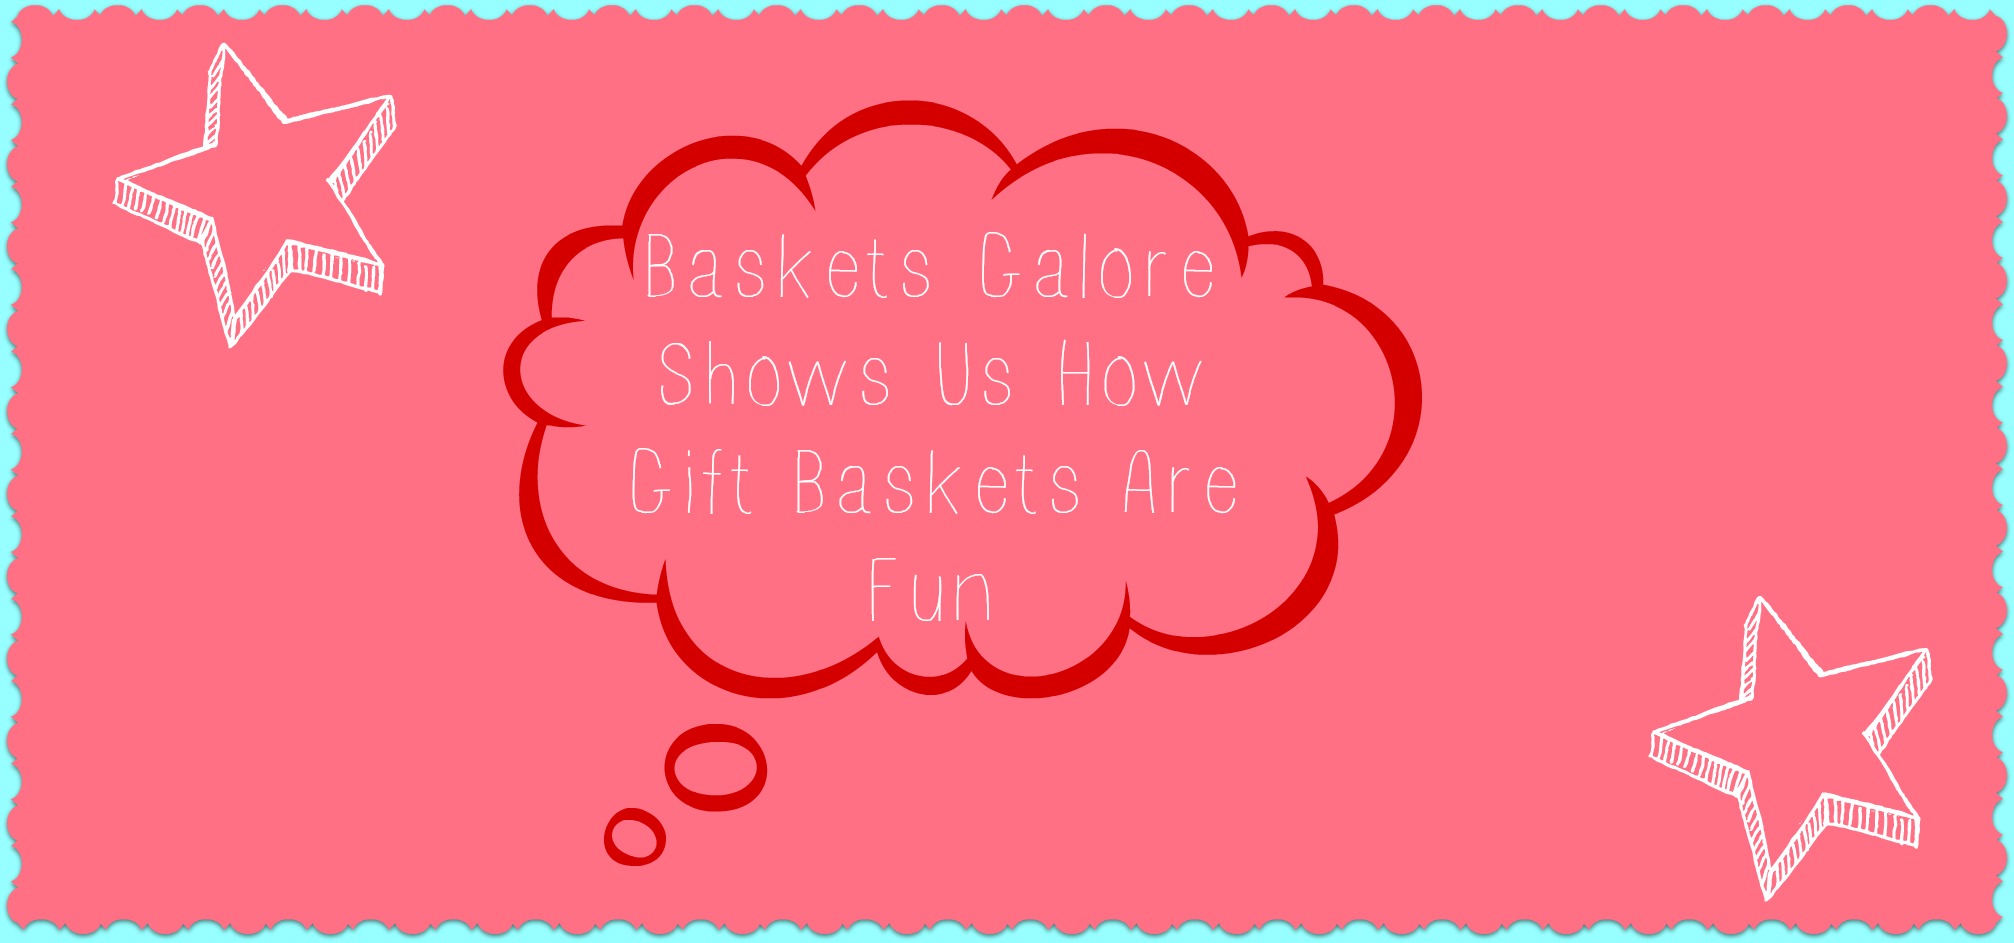 Baskets Galore Shows Us How Gift Baskets Are Fun